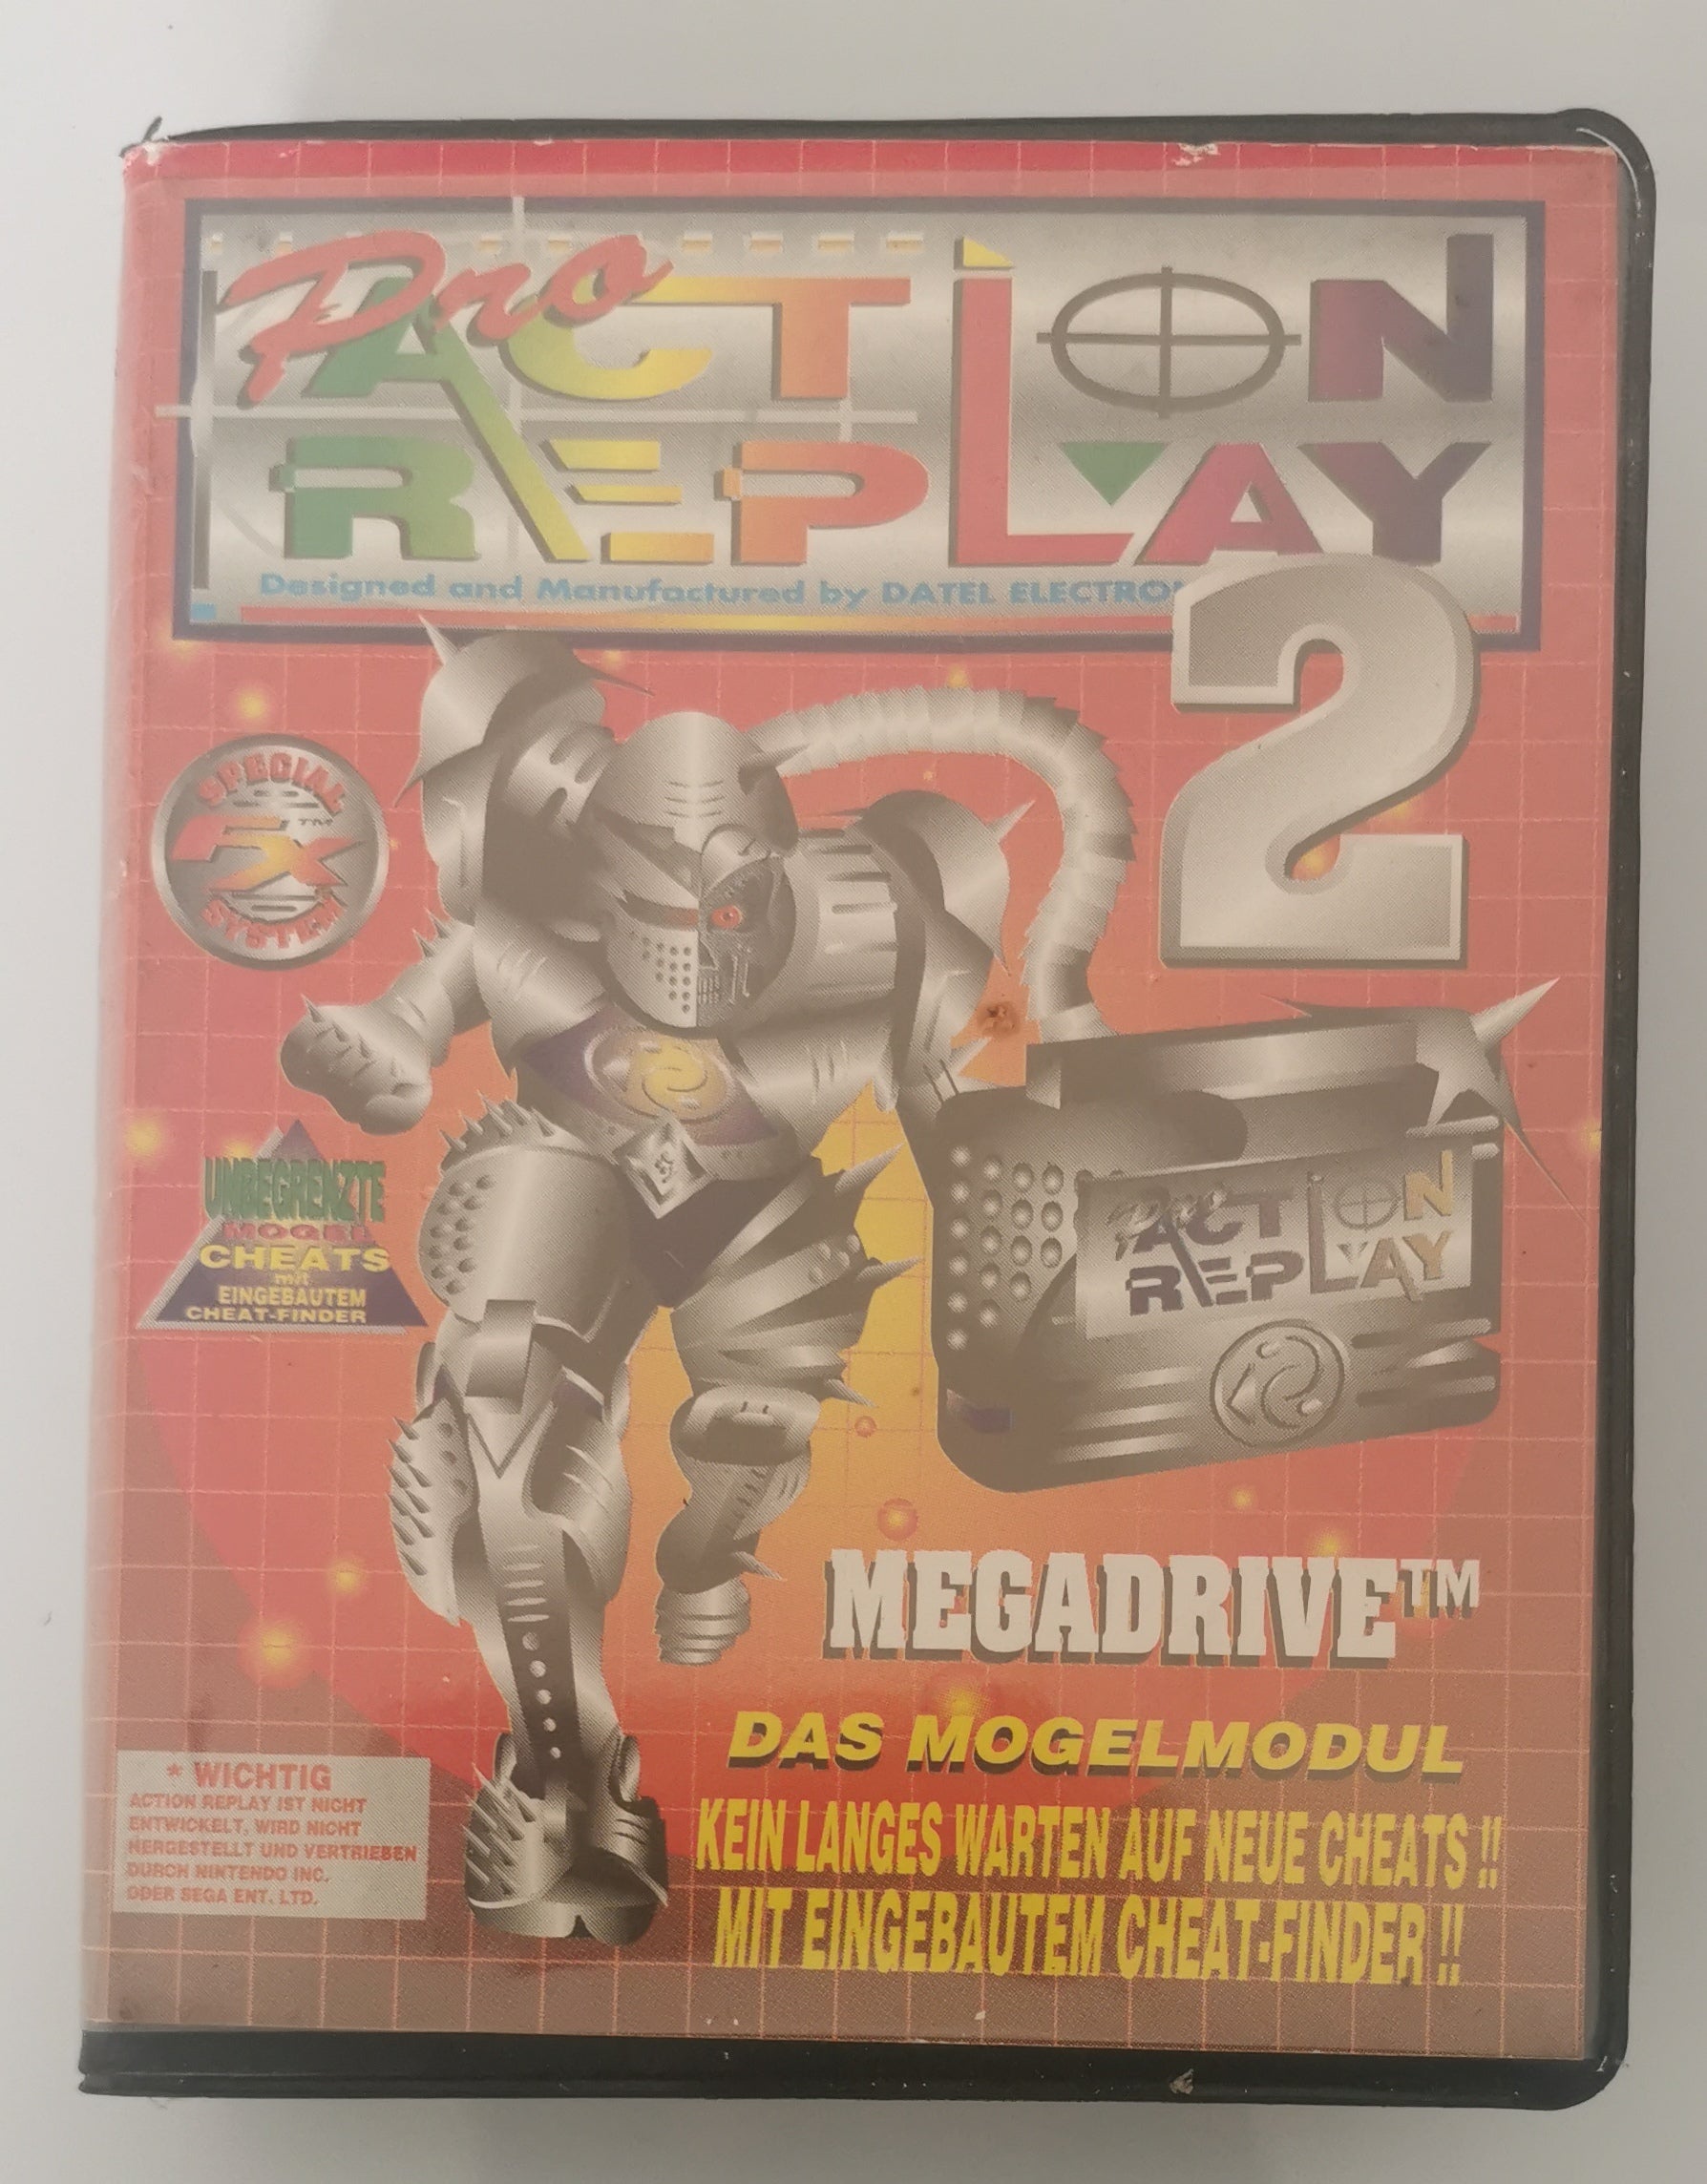 Pro action Replay 2 Import adapter Fuer Megadrive PAL [Gut]